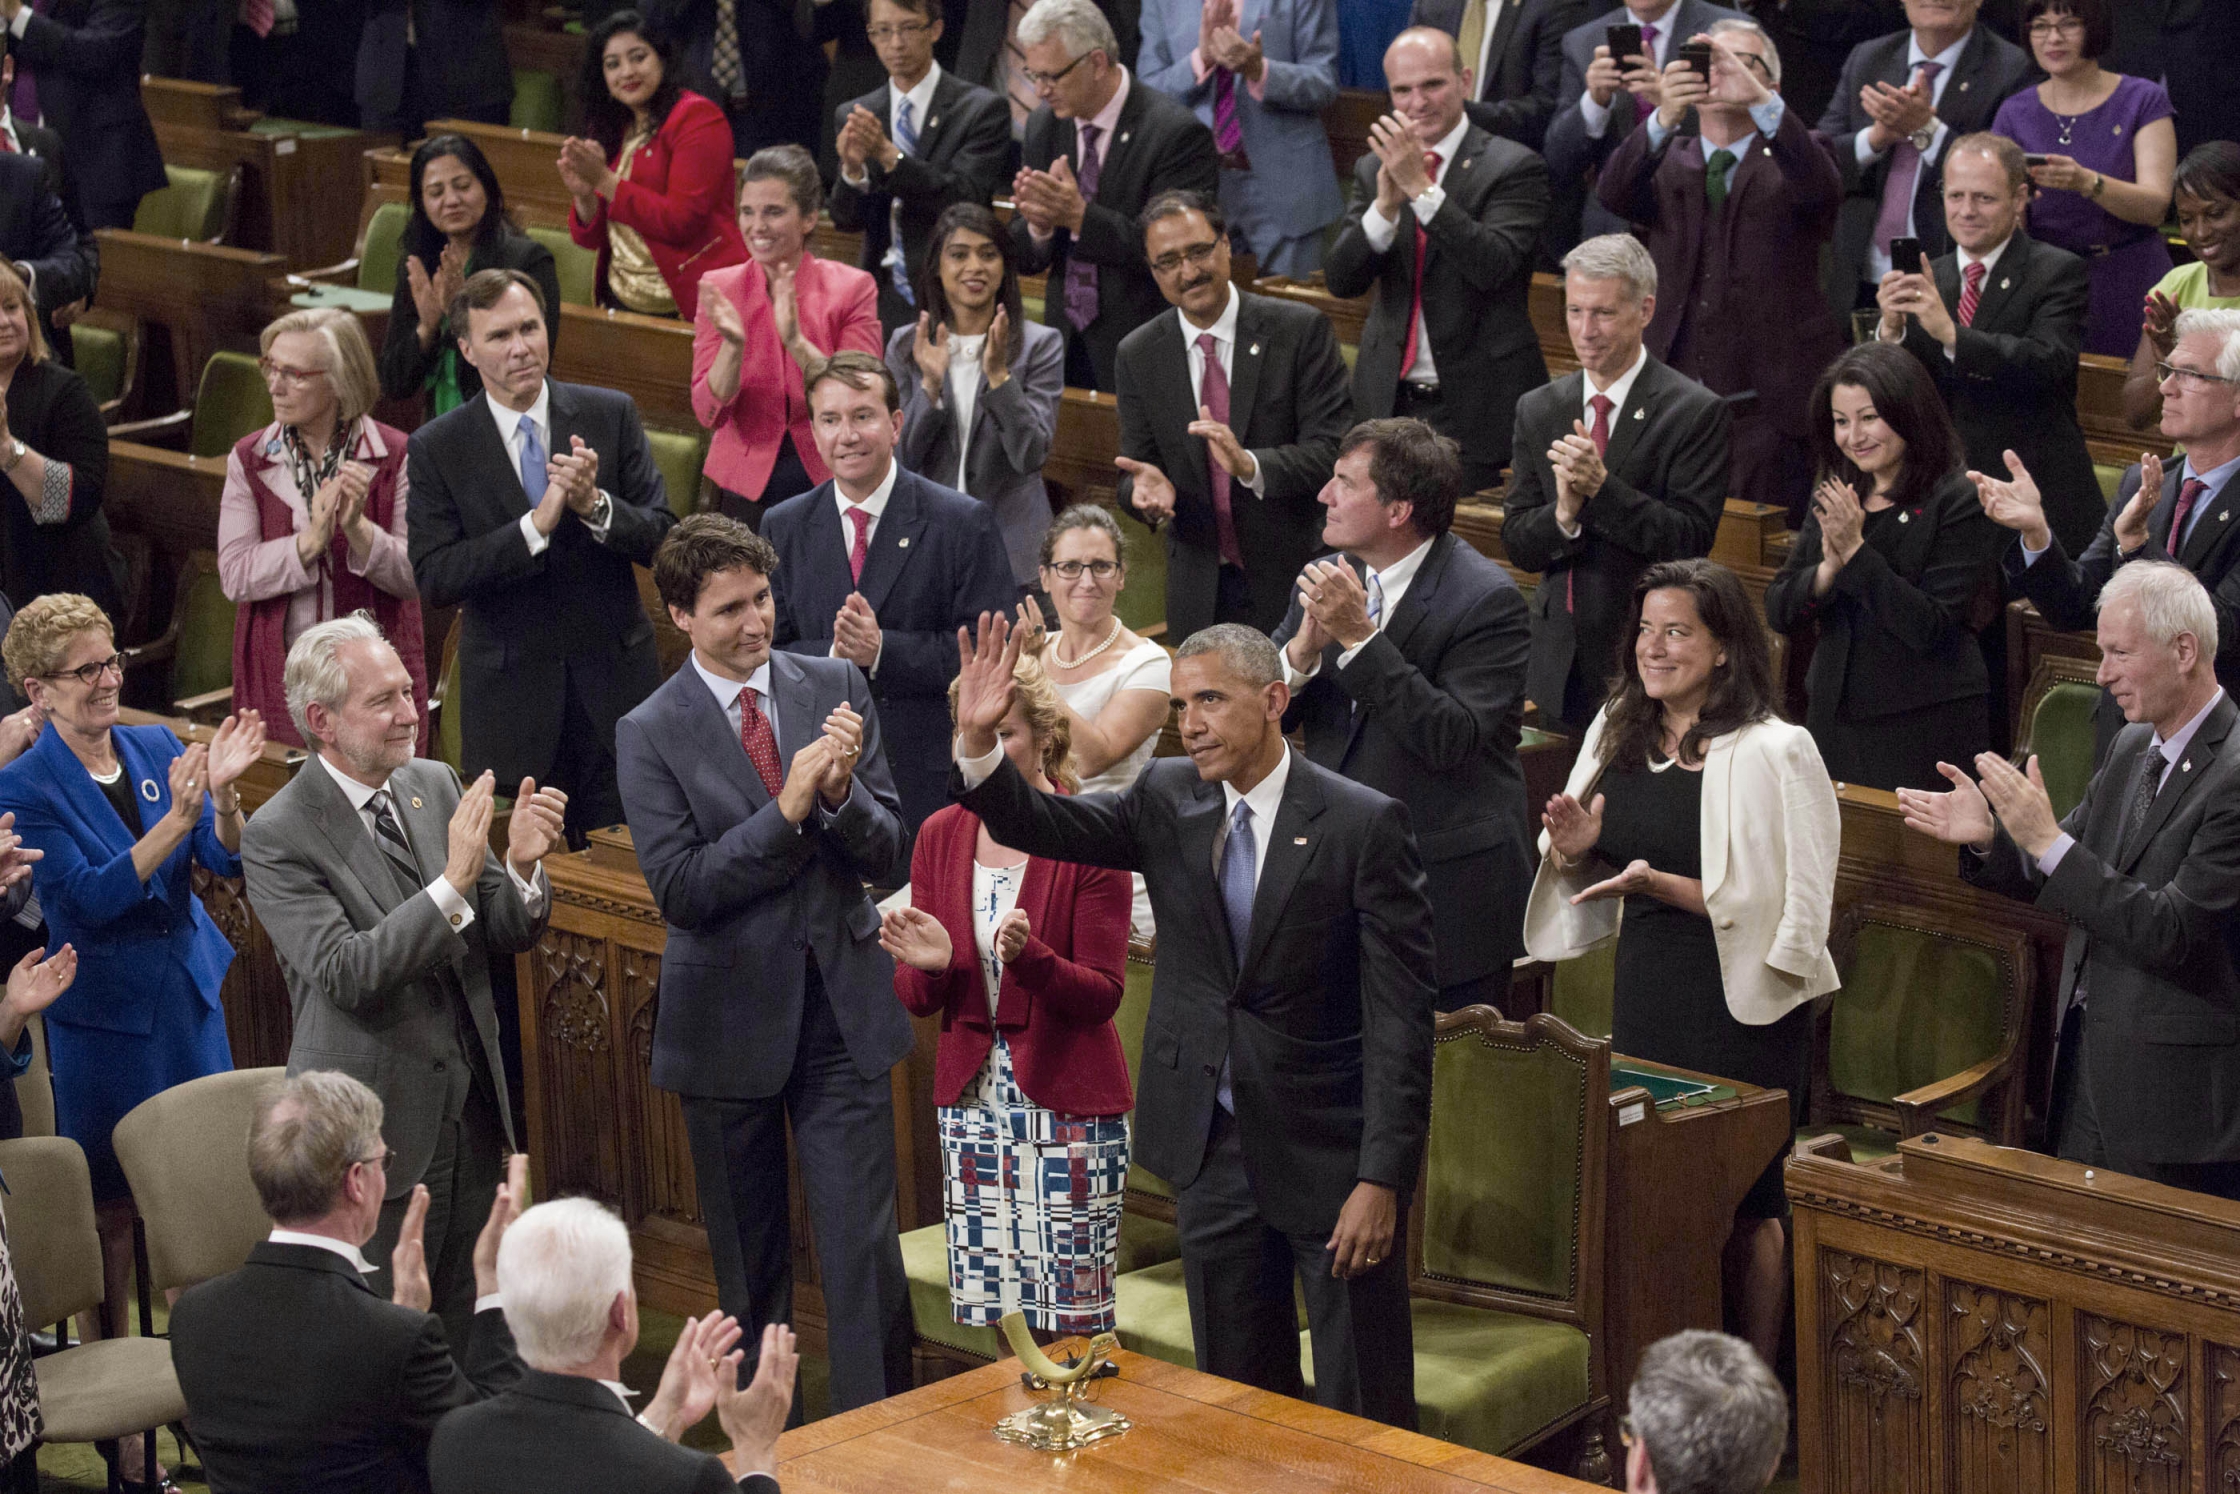 President Barack Obama waves after delivering an address to Parliament in the House of Commons Chamber at Parliament Hill in Ottawa, Canada, June 29, 2016. (Official White House Photo by Lawrence Jackson)